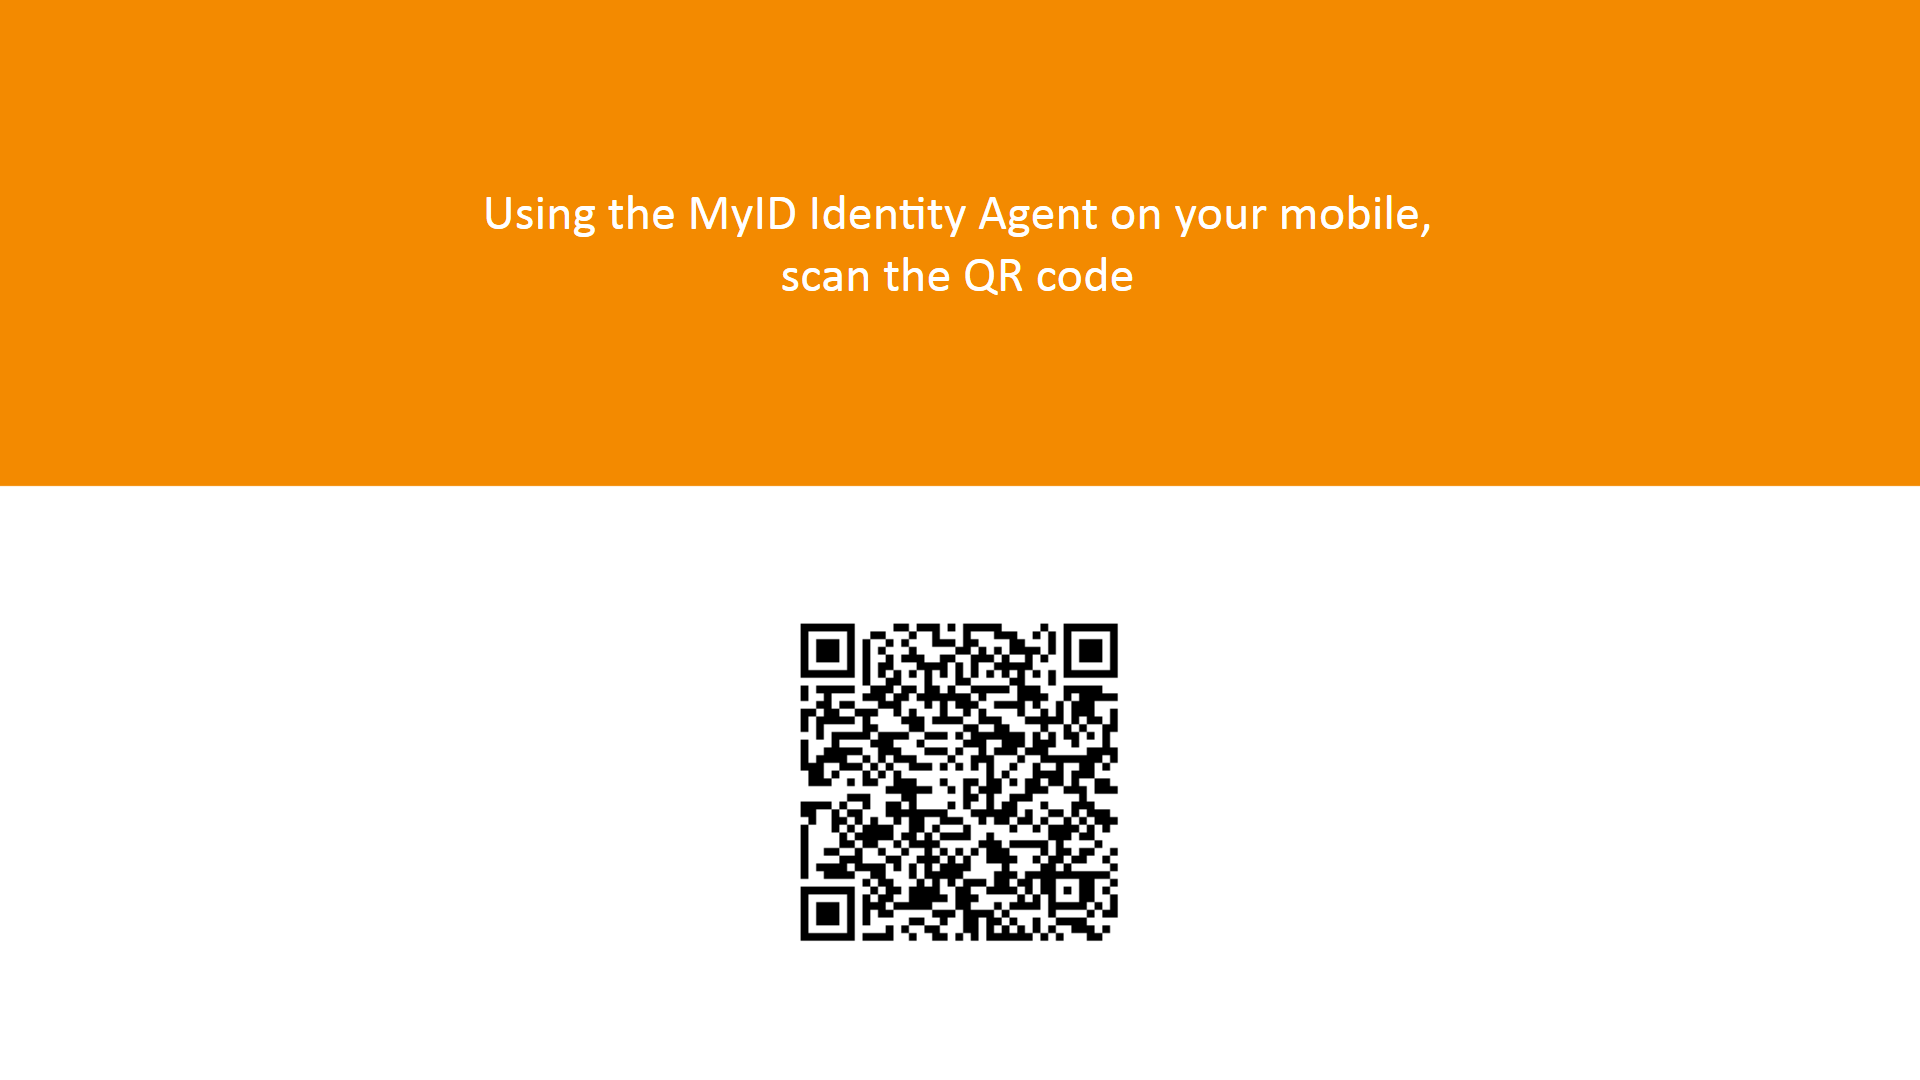 A screenshot of the MyID Self-Service Kiosk showing the QR code.